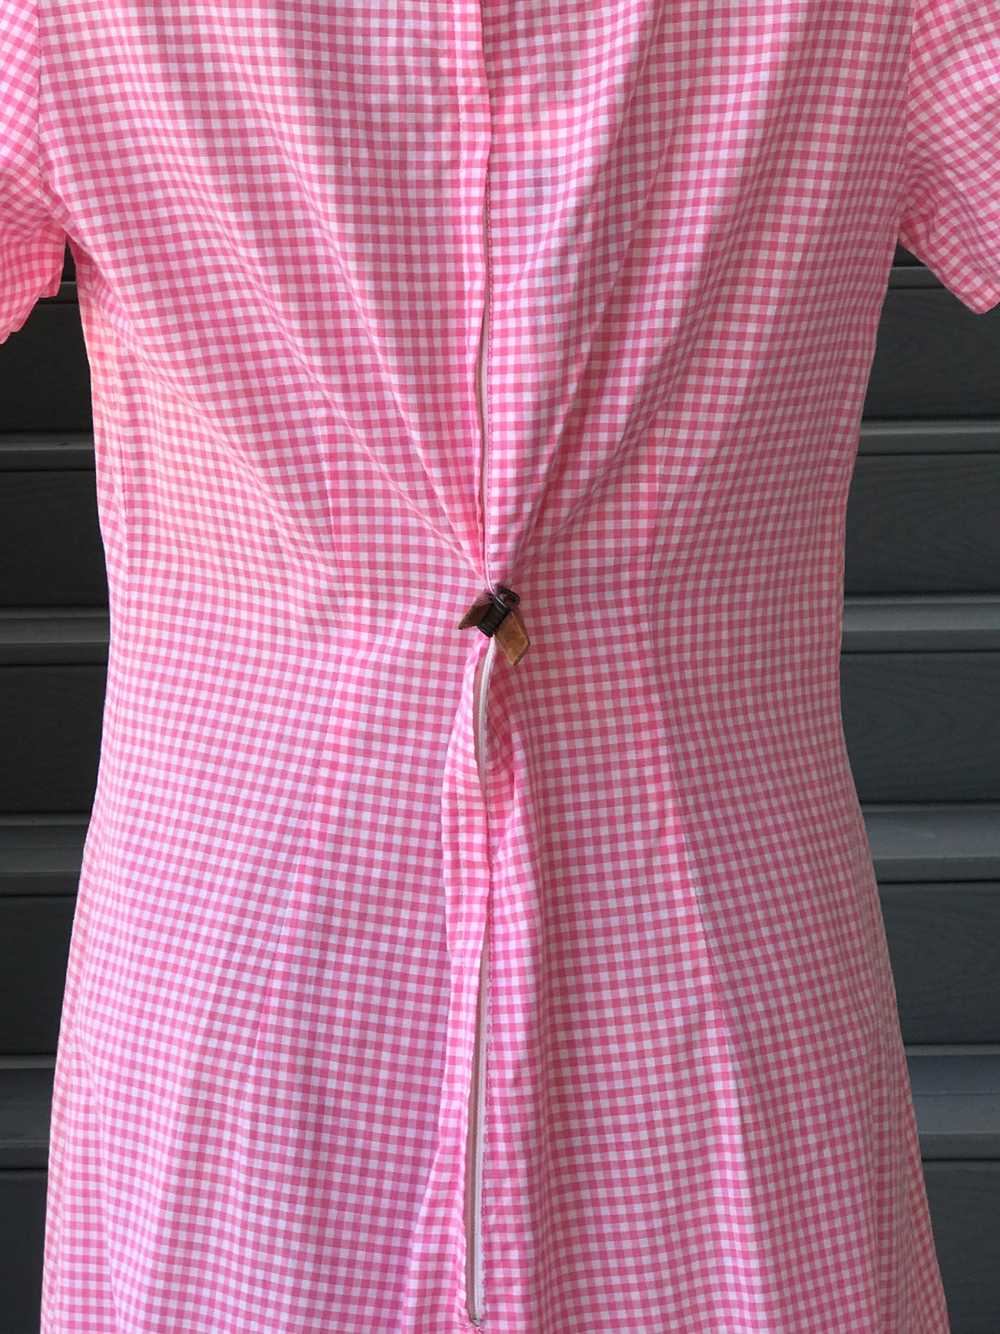 1960s Pink Checkered Day Dress - image 6